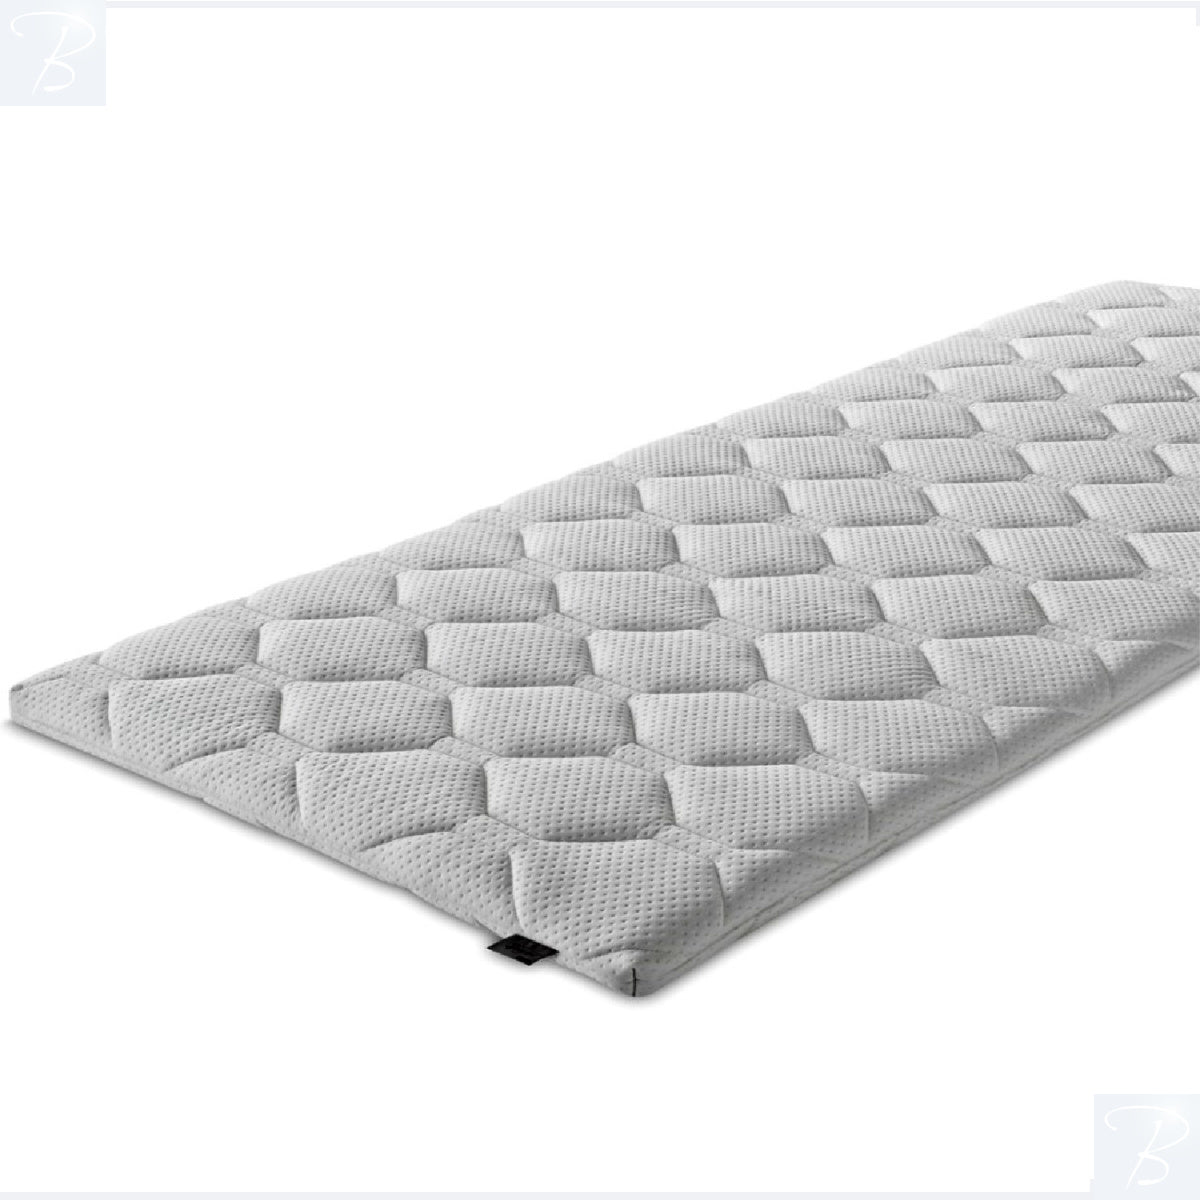 Topmatras Comfor Auping - surmatelas Auping-mattres topper Auping